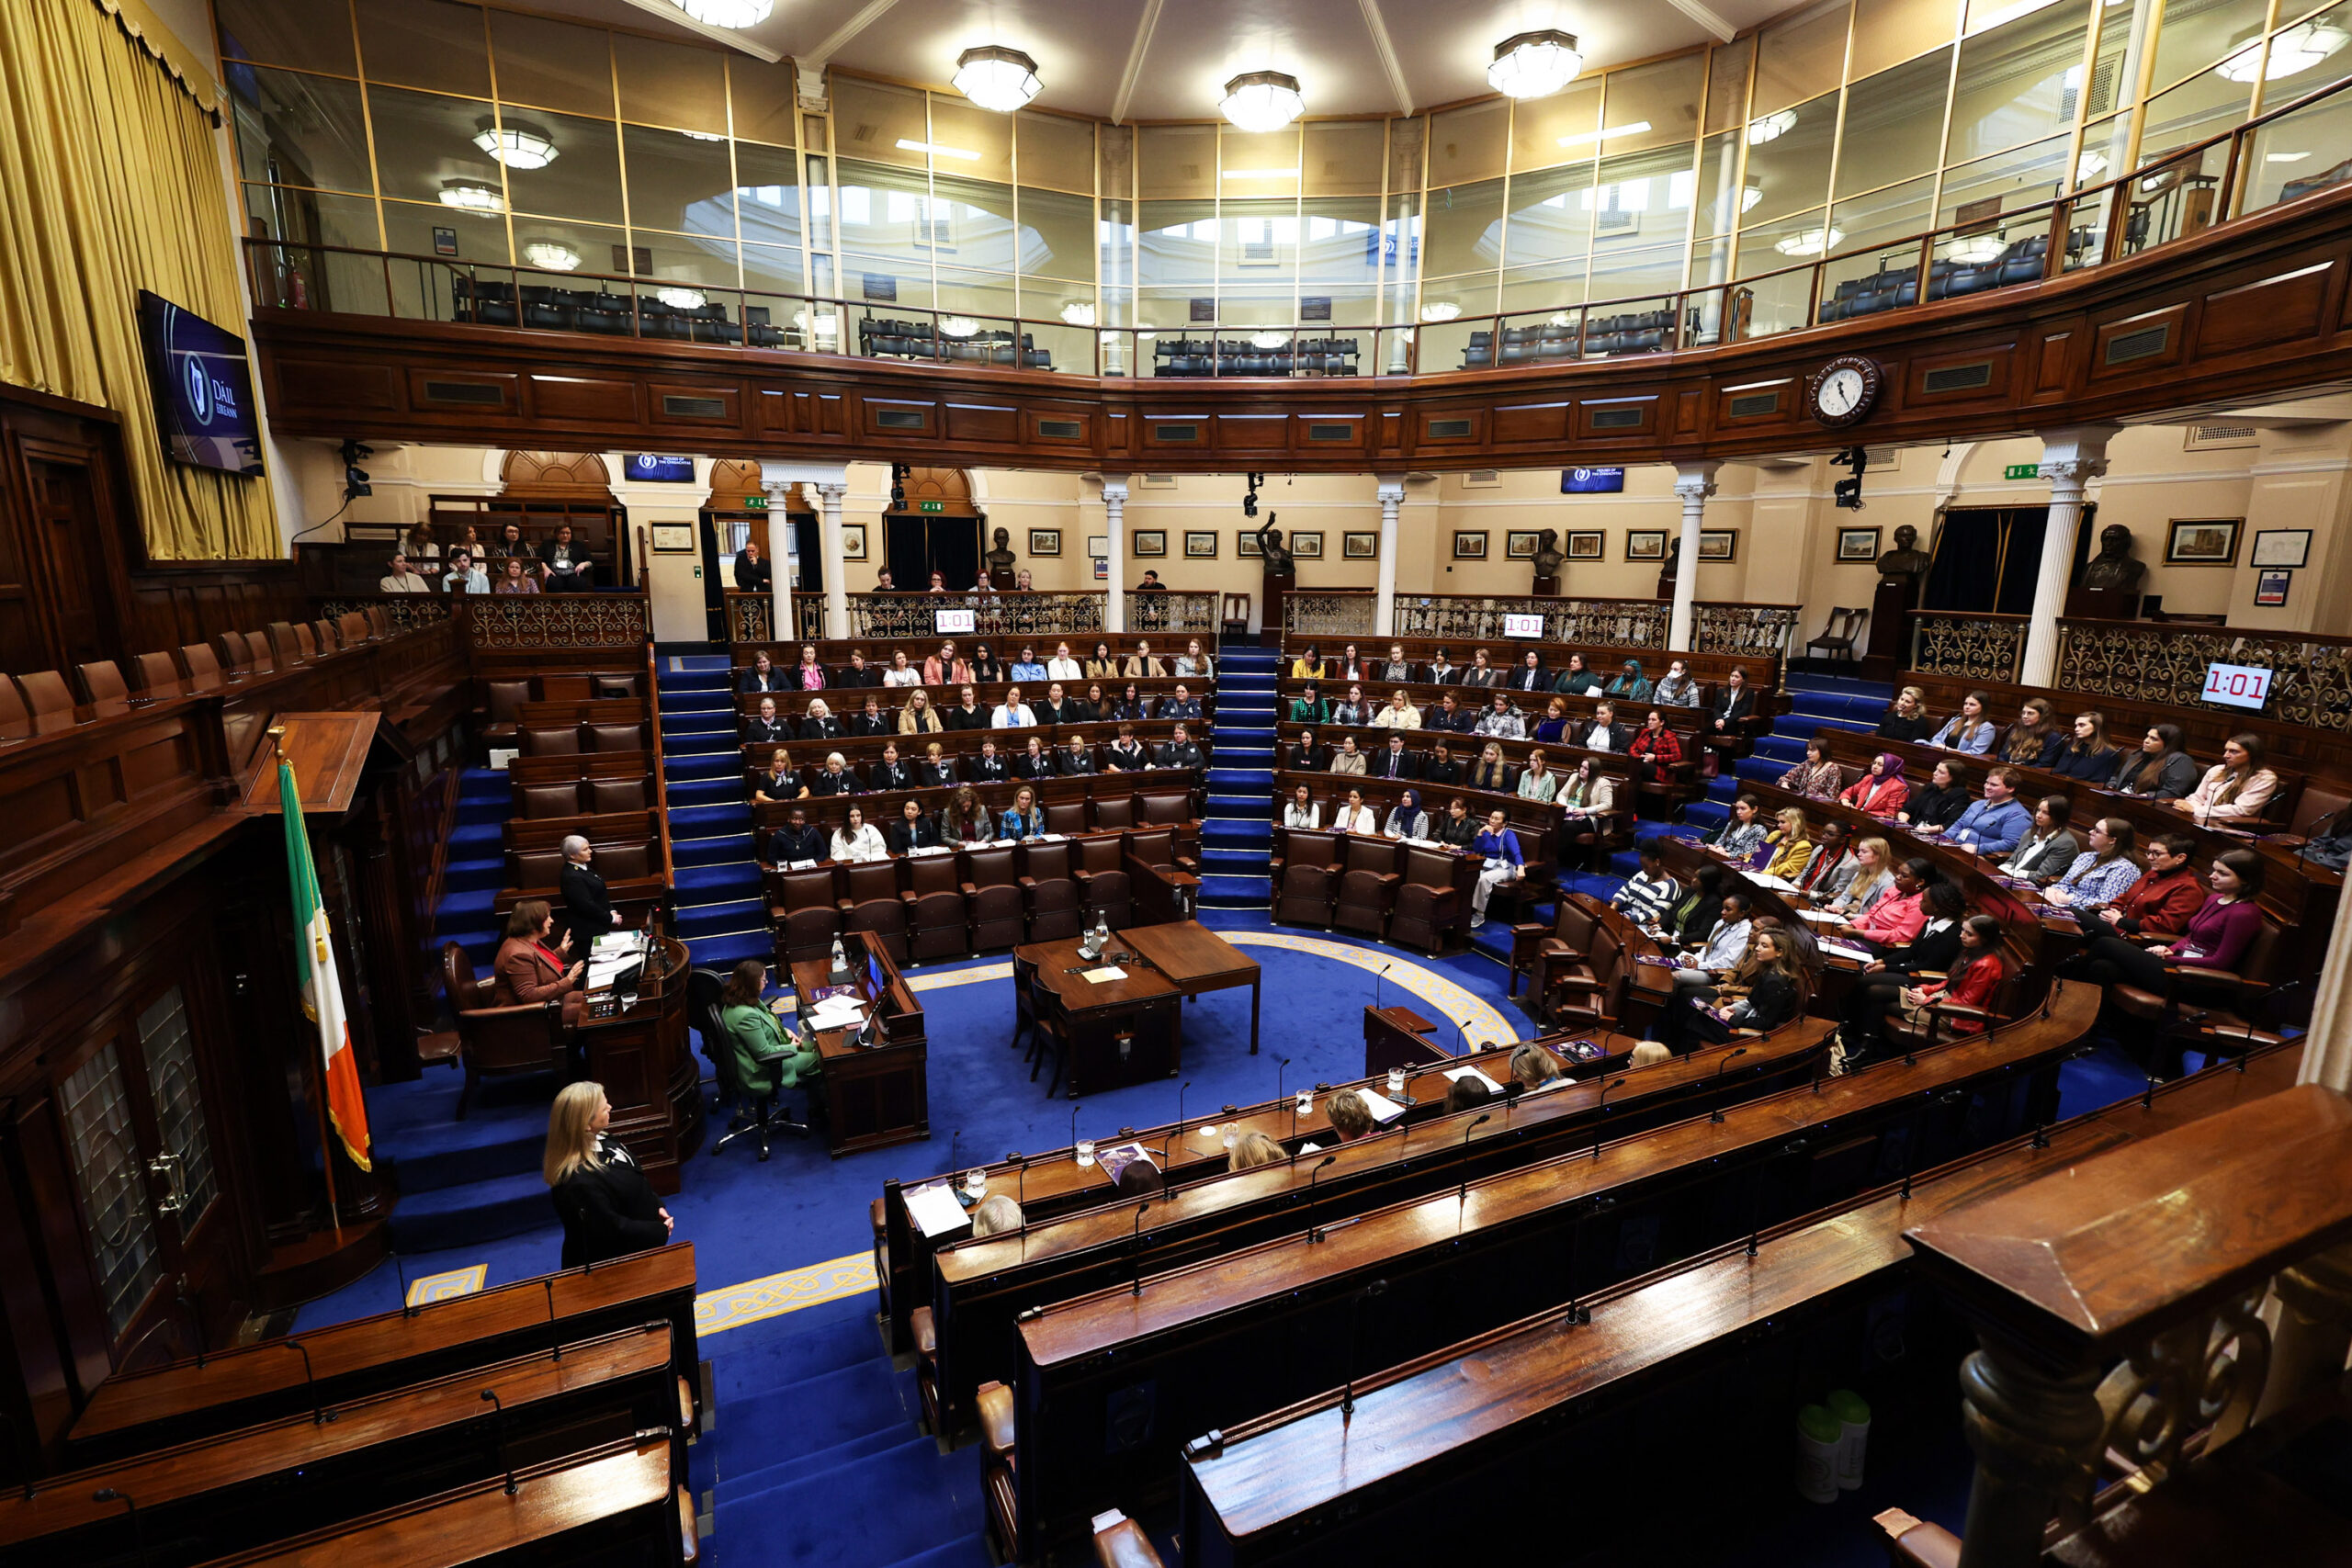 A wide shot showcasing the Dáil floor with seats completely filled.